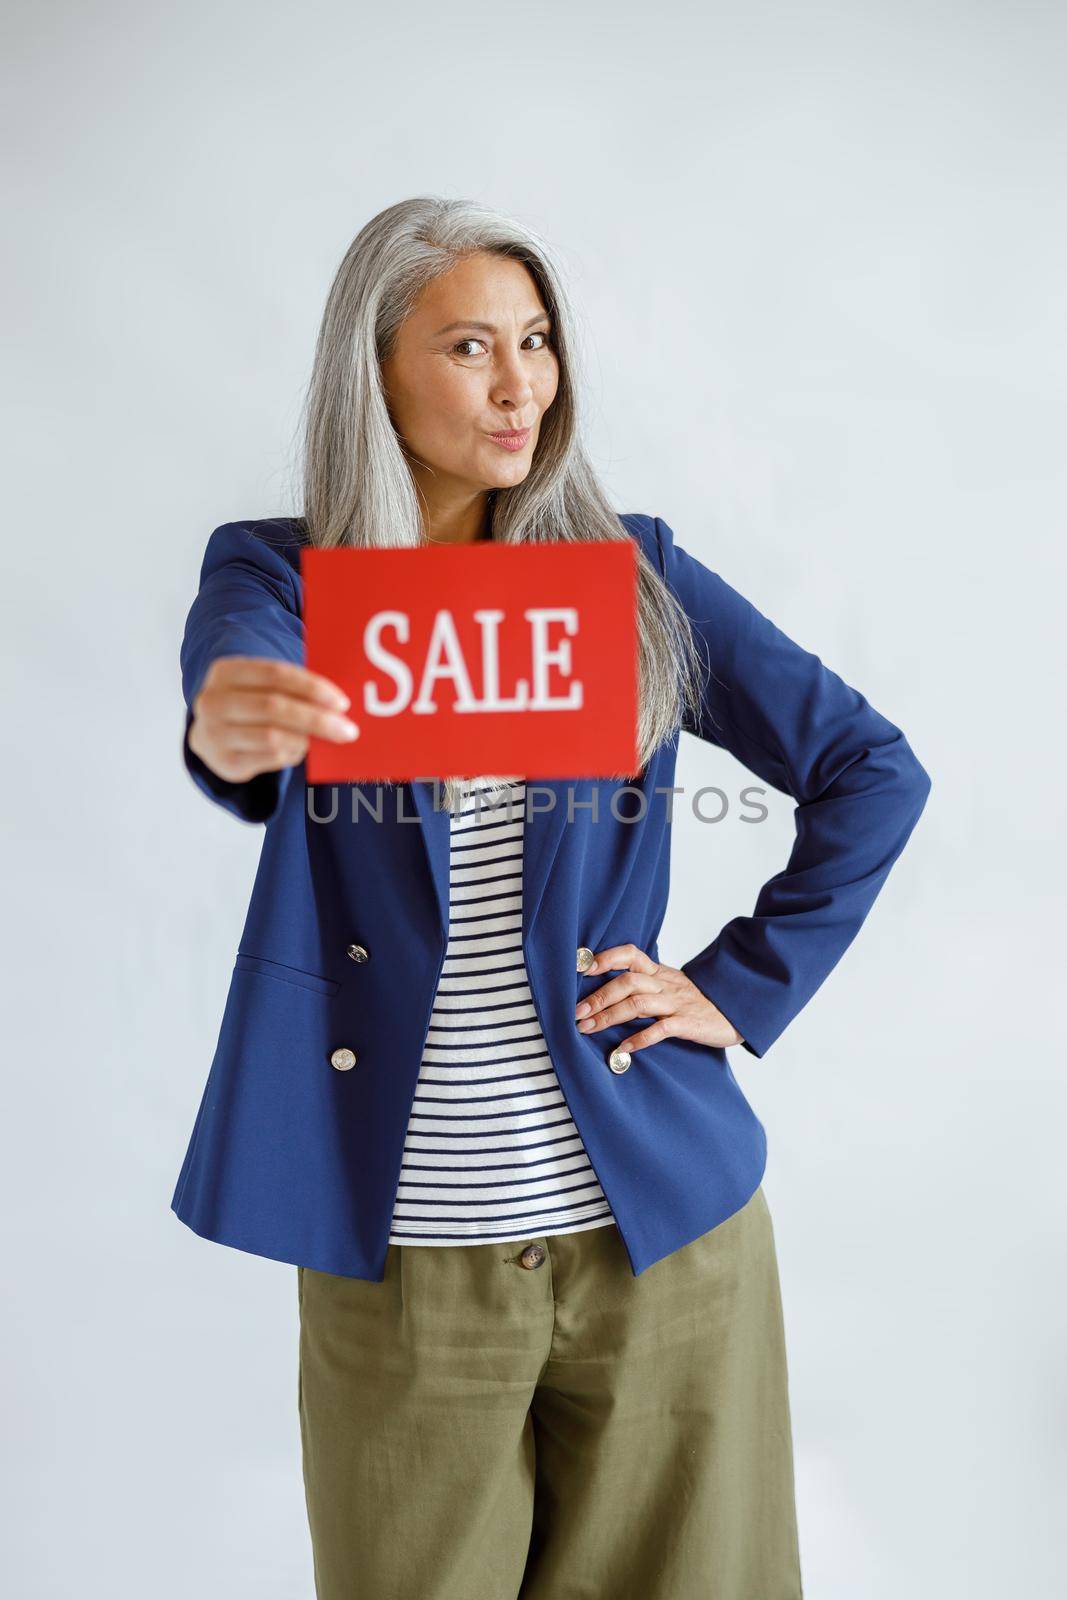 Cute mature Asian lady with loose grey hair wearing elegant jacket holds red card with word Sale posing on light background in studio